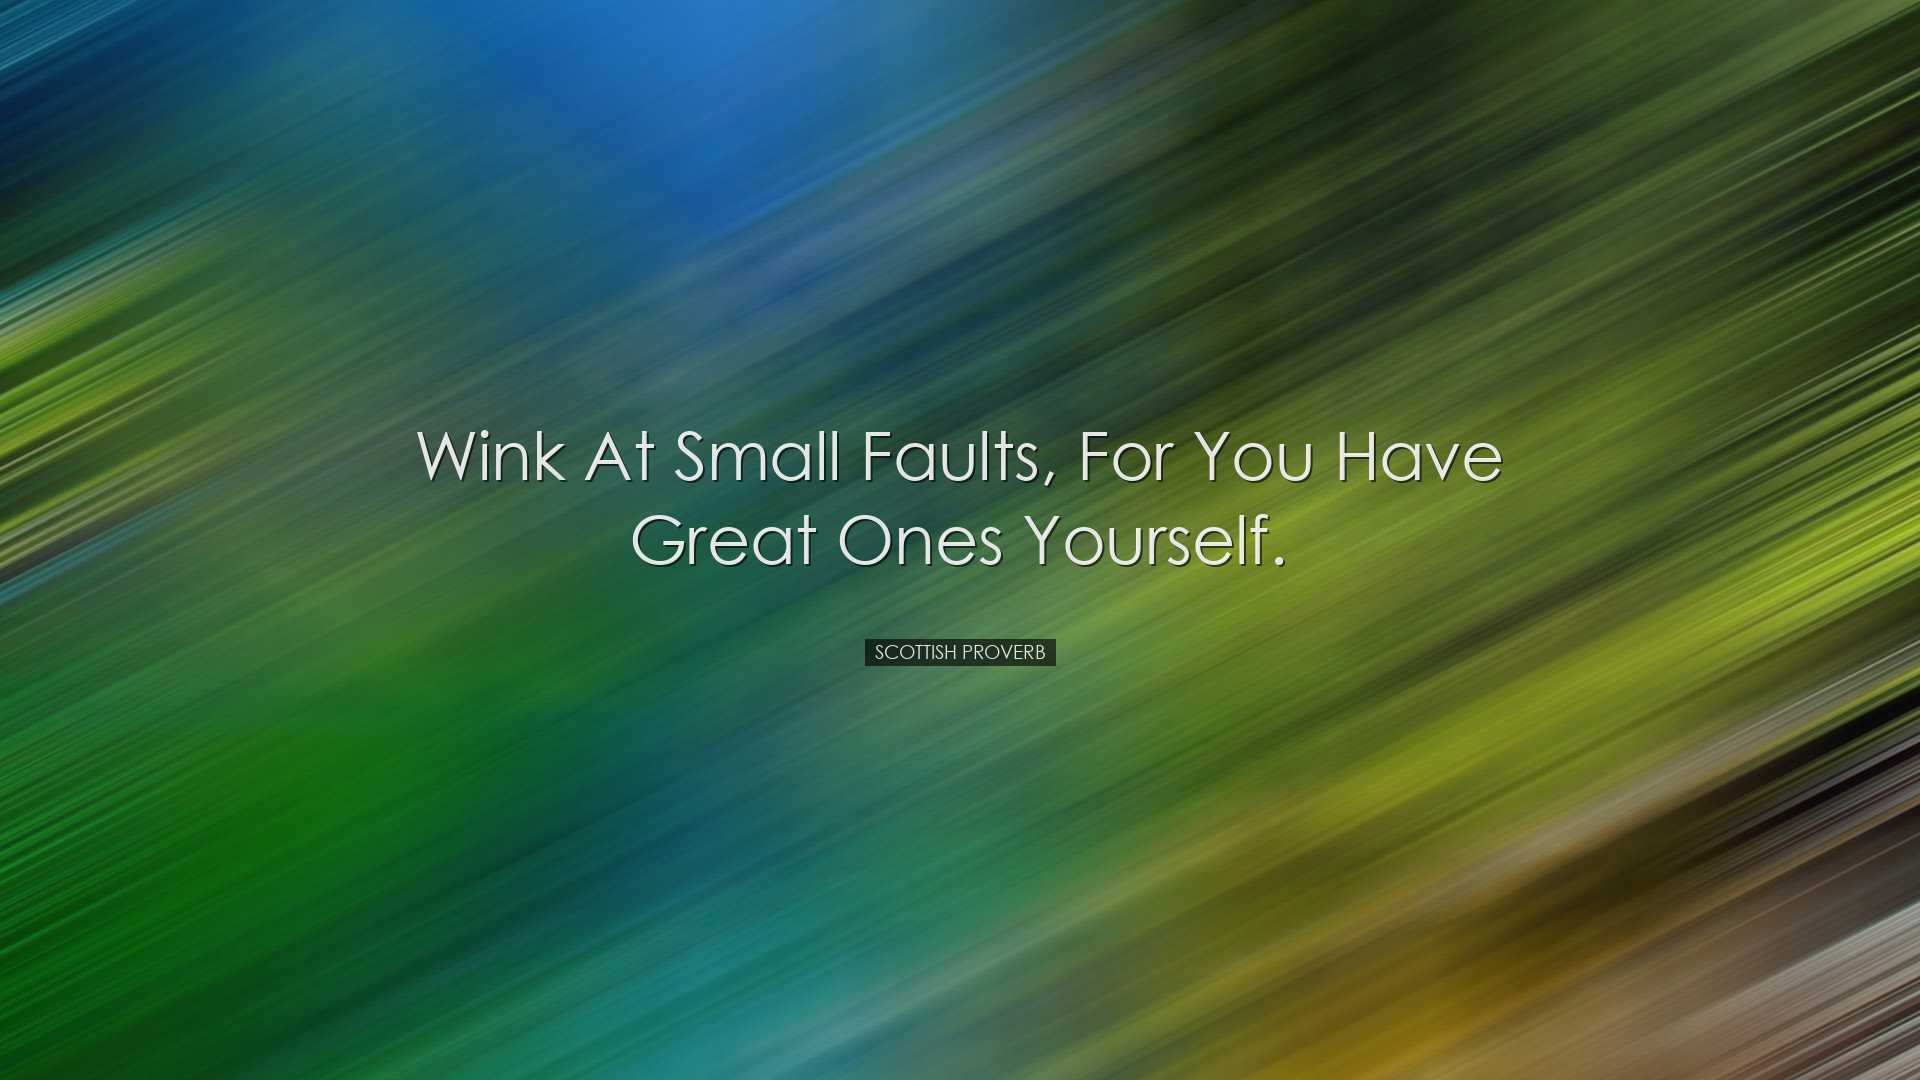 Wink at small faults, for you have great ones yourself. - Scottish